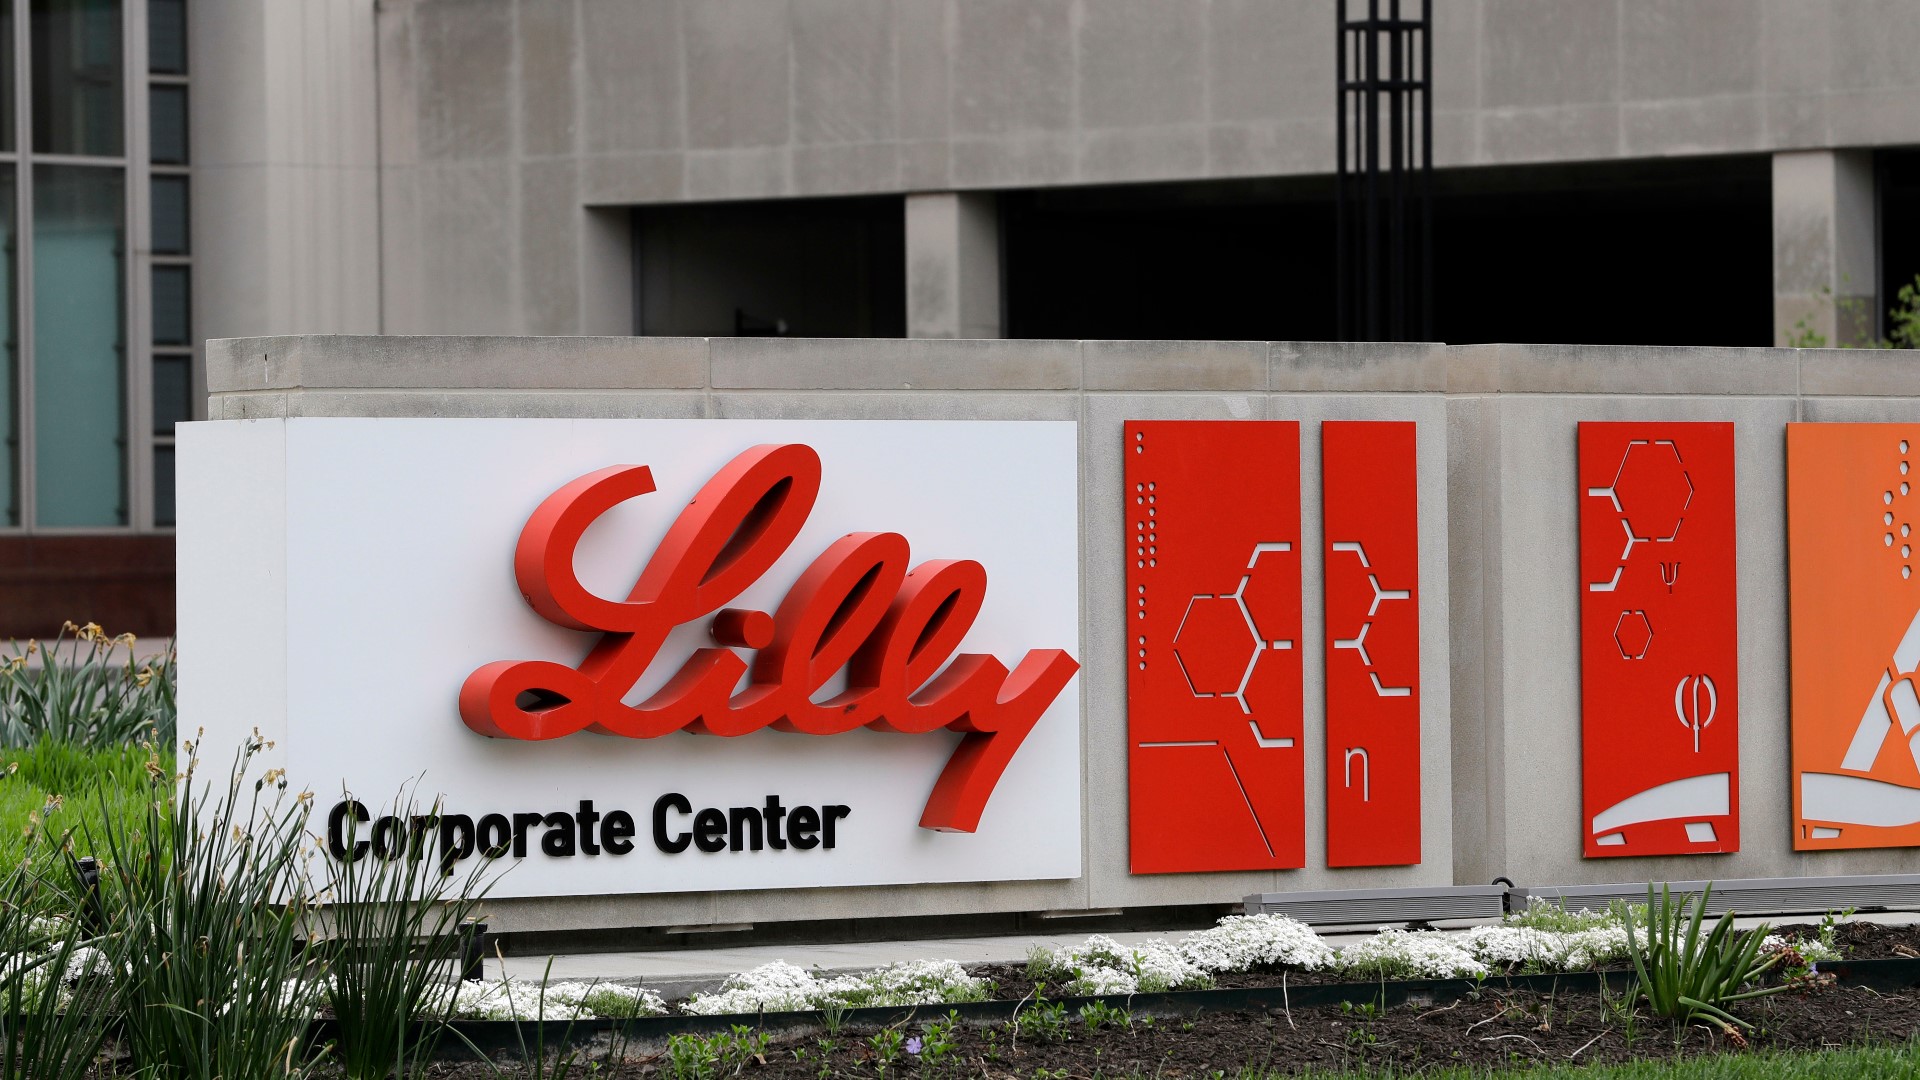 After well over a century of being headquartered in Indianapolis, Pharmaceutical giant Eli Lilly said it's looking to grow outside the Hoosier state.